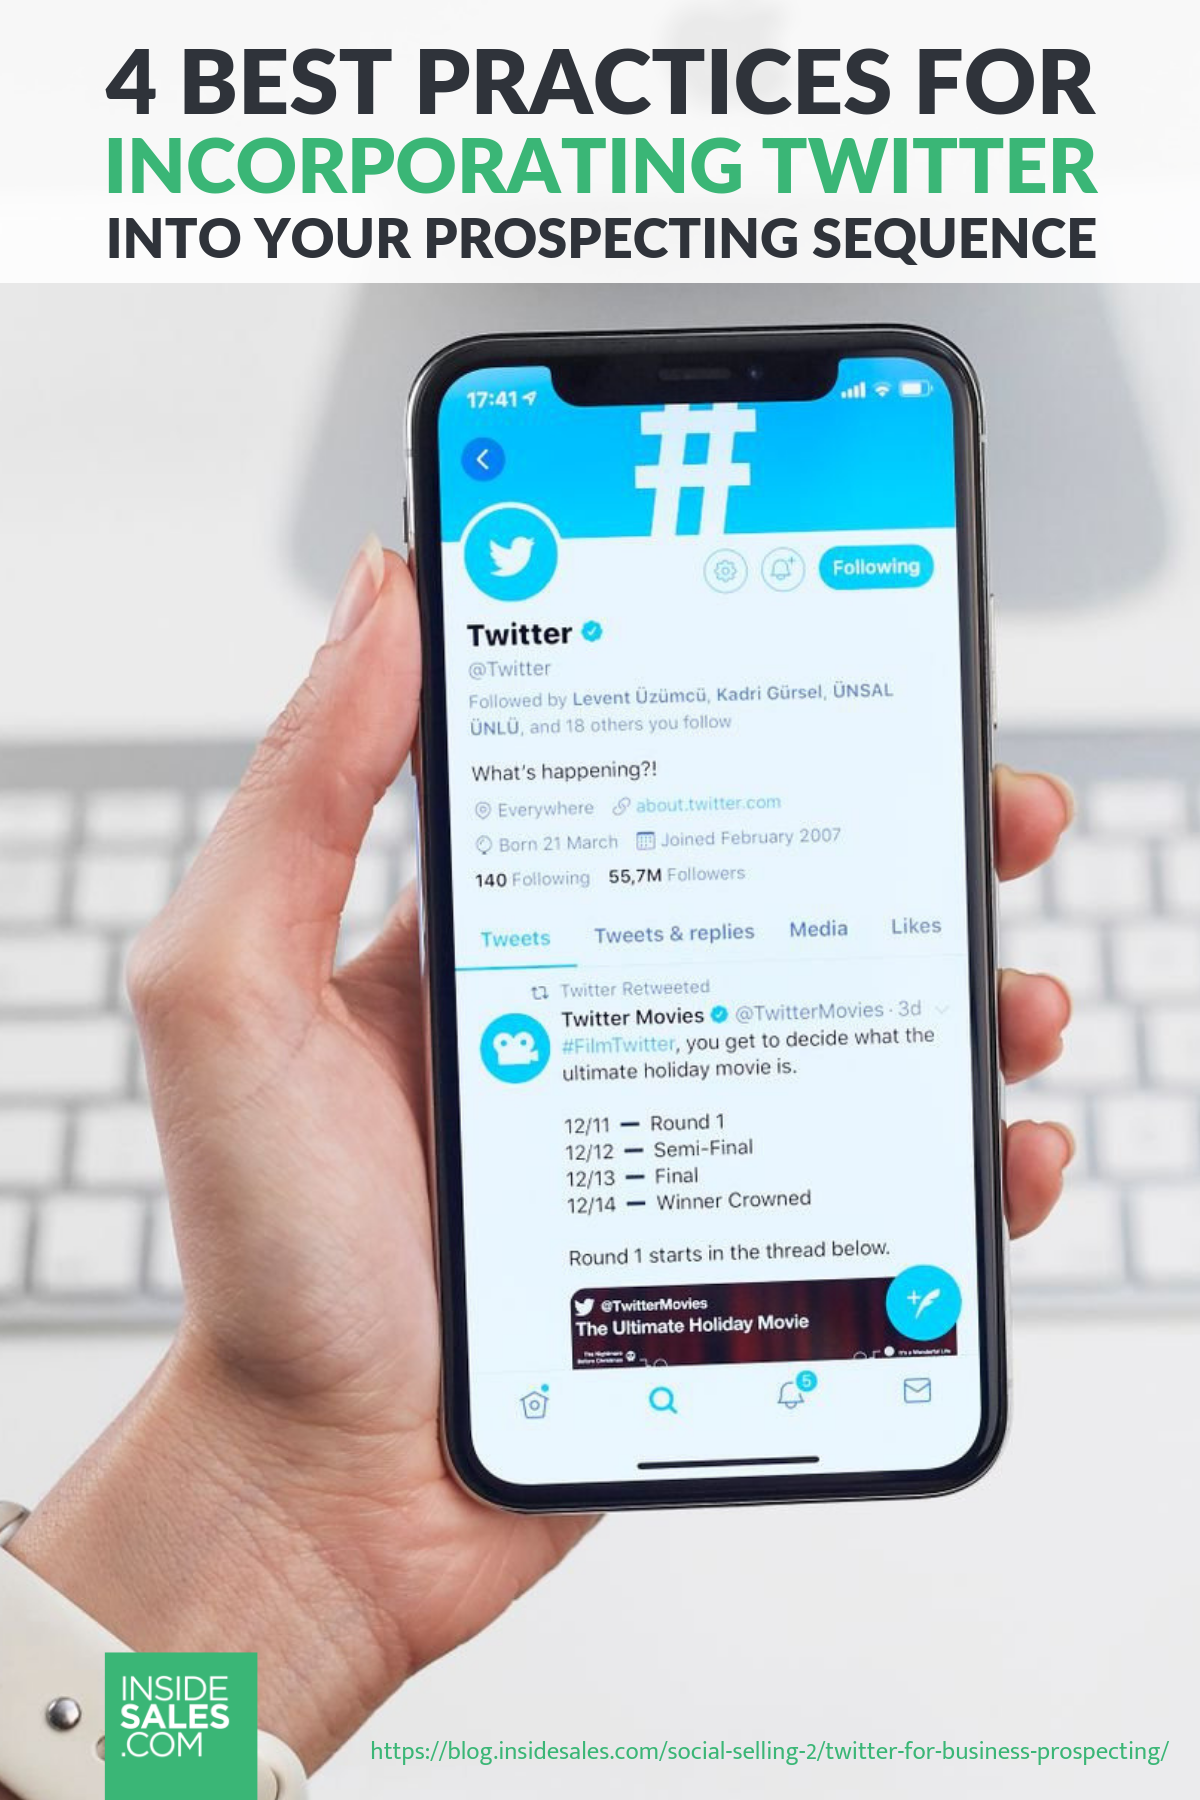 4 Best Practices For Incorporating Twitter Into Your Prospecting Sequence https://www.insidesales.com/blog/social-selling-2/twitter-for-business-prospecting/